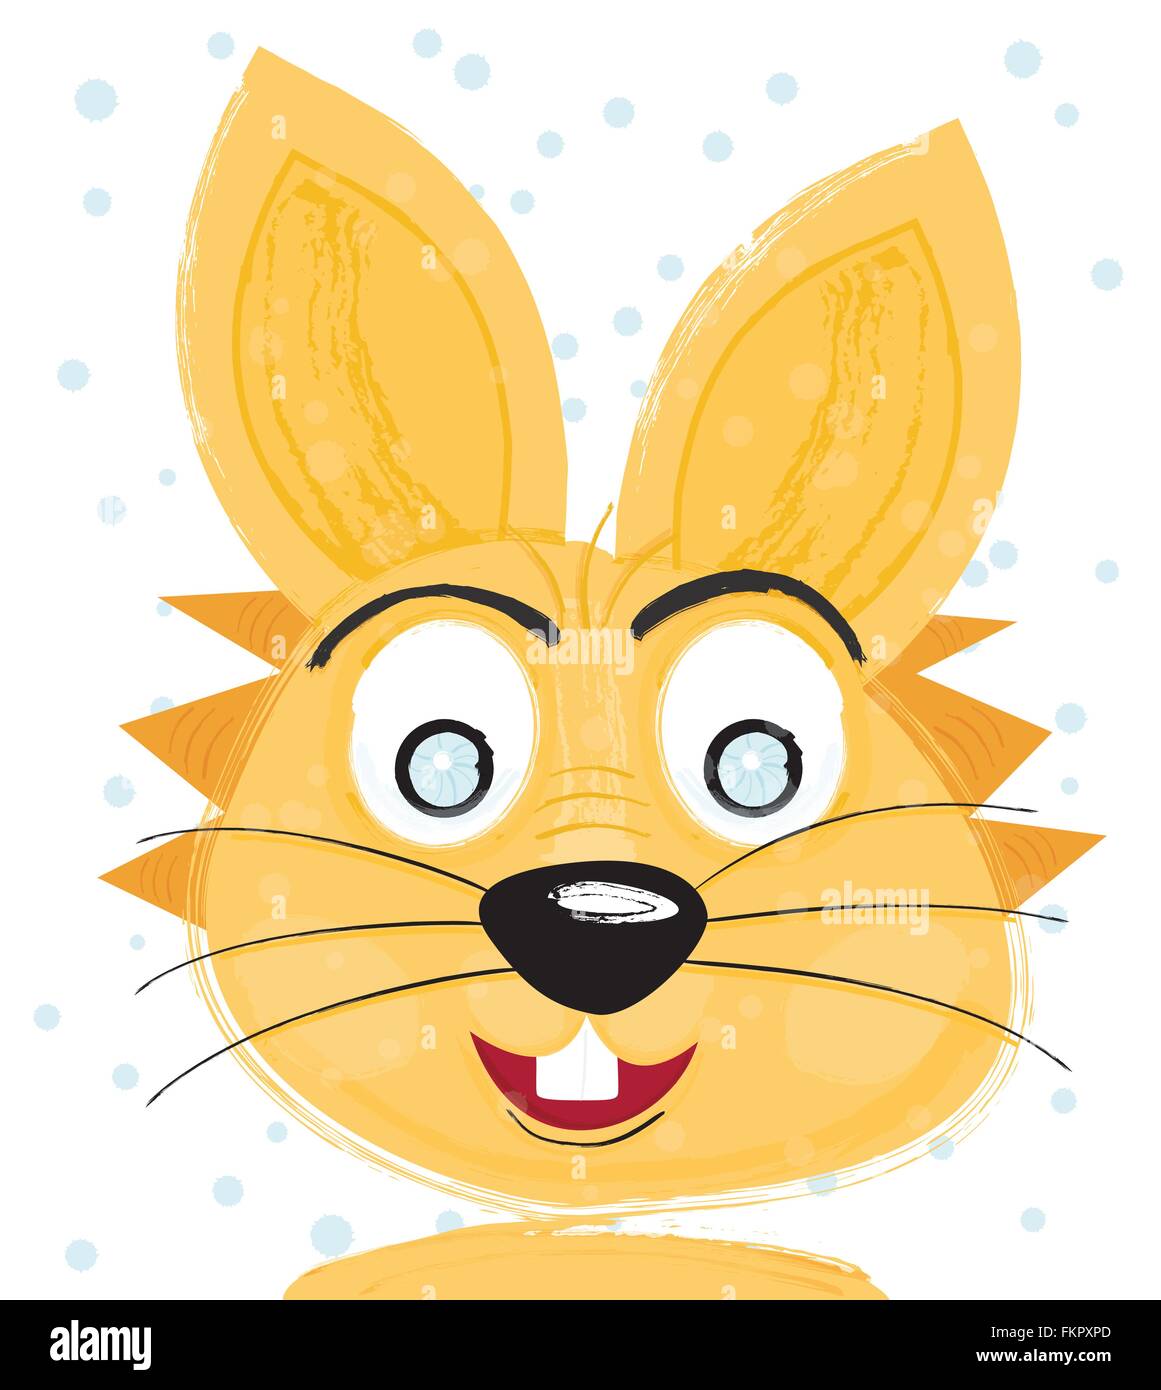 Easter Bunny Isolated on White Background. Vector Illustration. Happy Easter Card with Smiling Rabbit Head Stock Vector